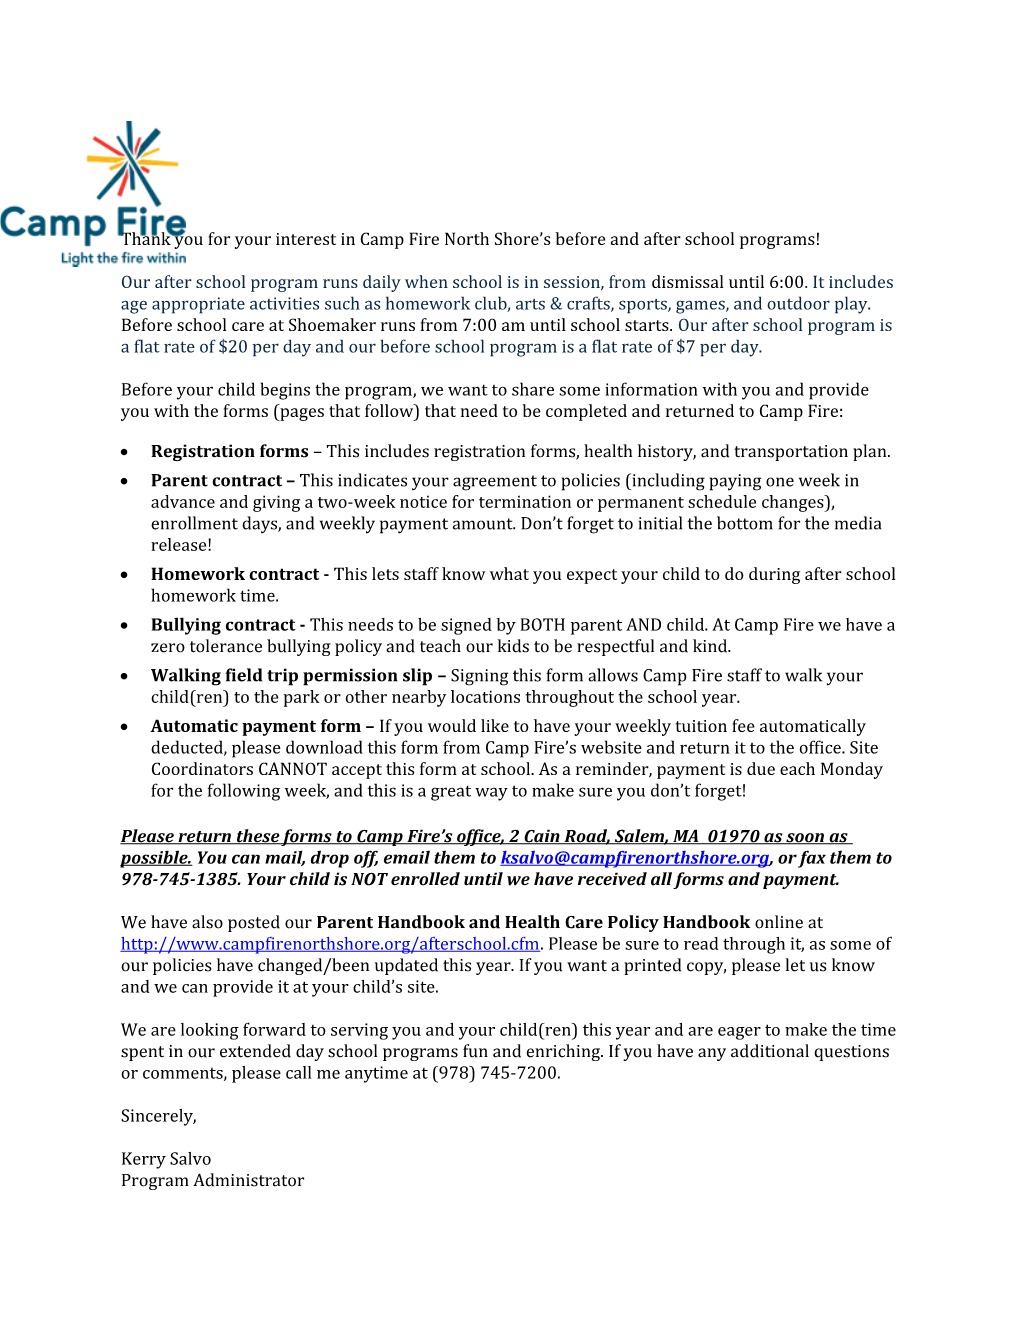 Thank You for Your Interest in Camp Fire North Shore S Before and After School Programs!